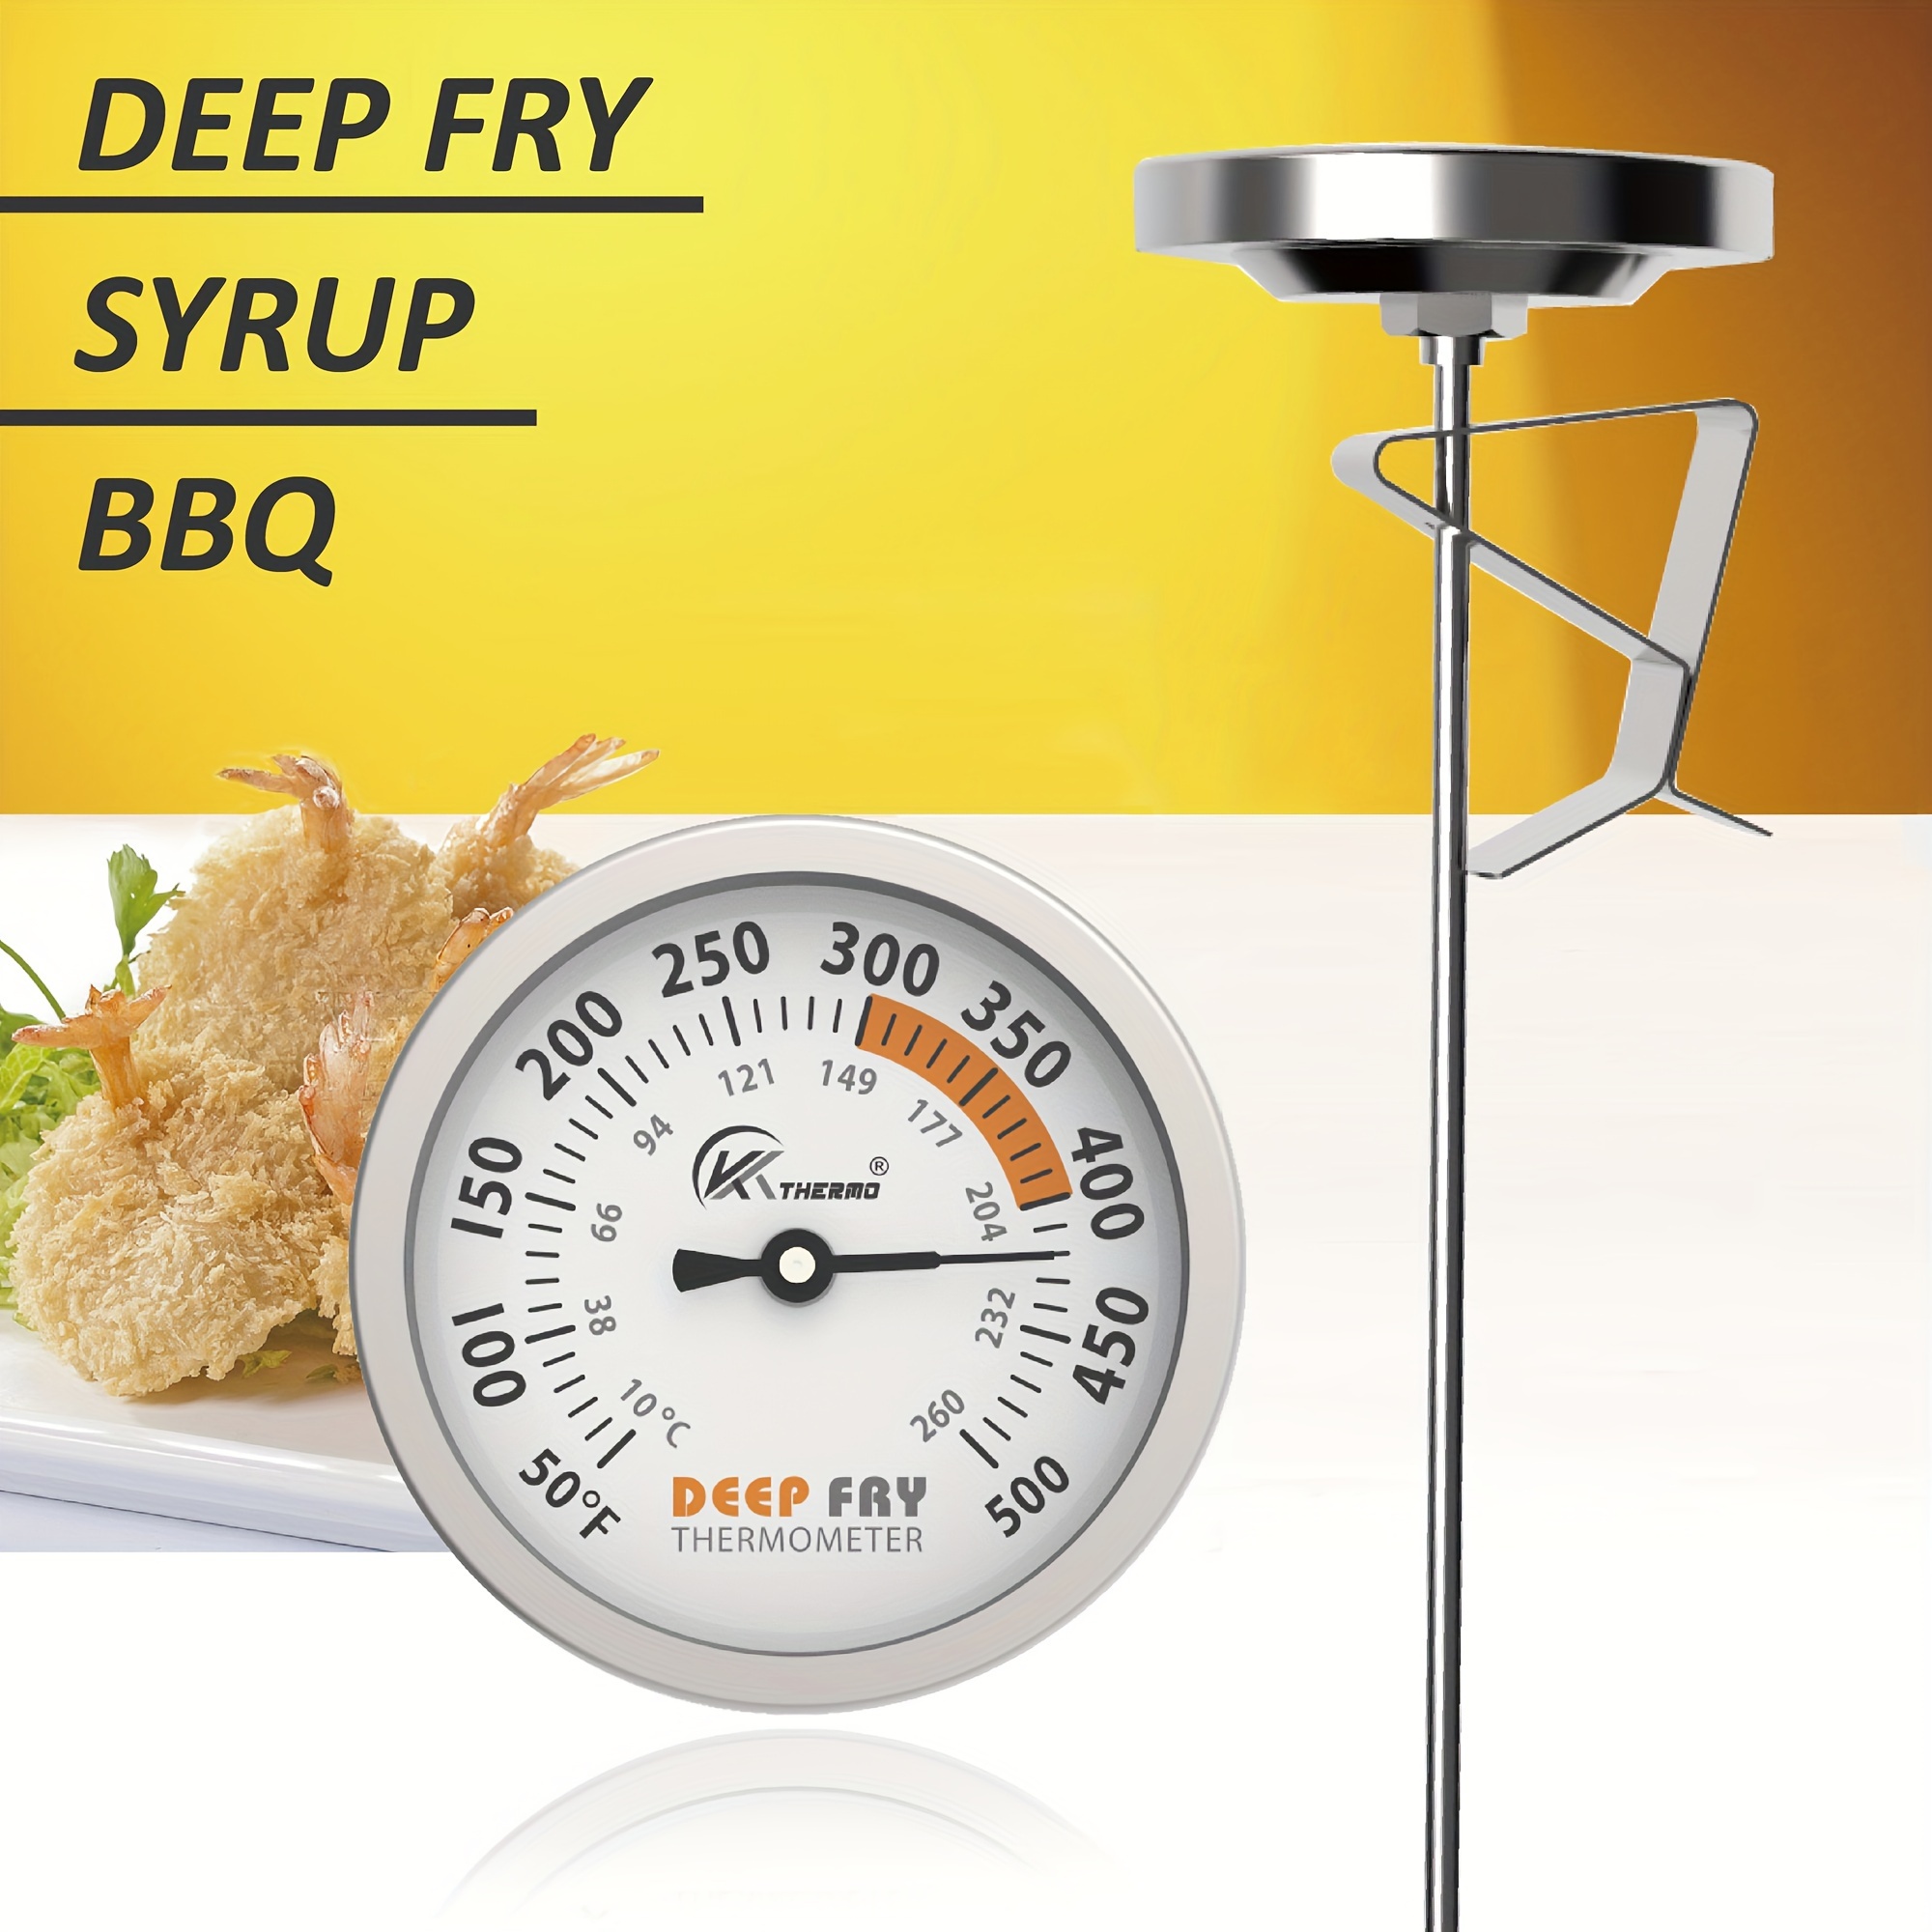 12 Barbecue Deep Fry Thermometer - Instant Read Dial Thermometer